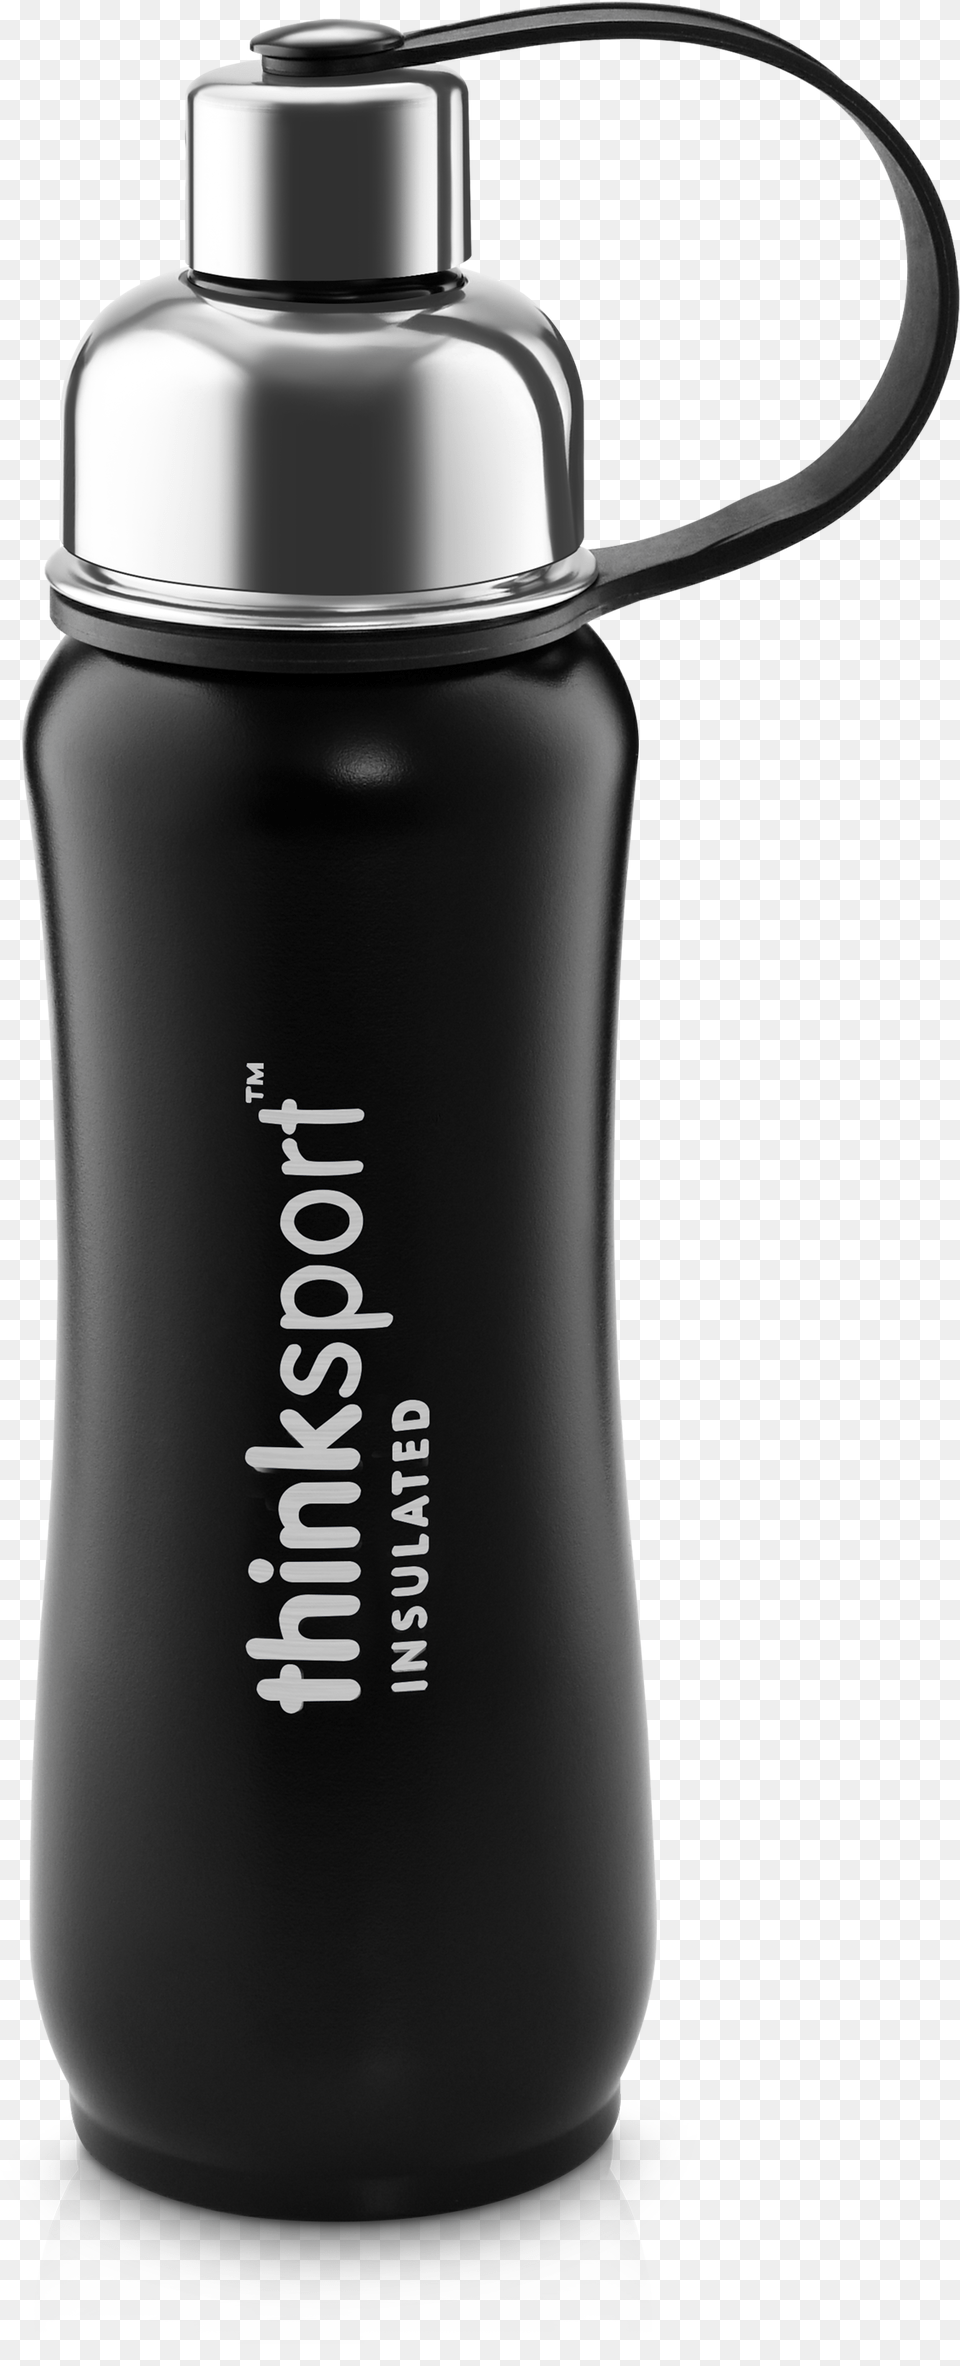 Video Think Thinksport Insulated Sports Bottle Blue, Water Bottle, Shaker Free Png